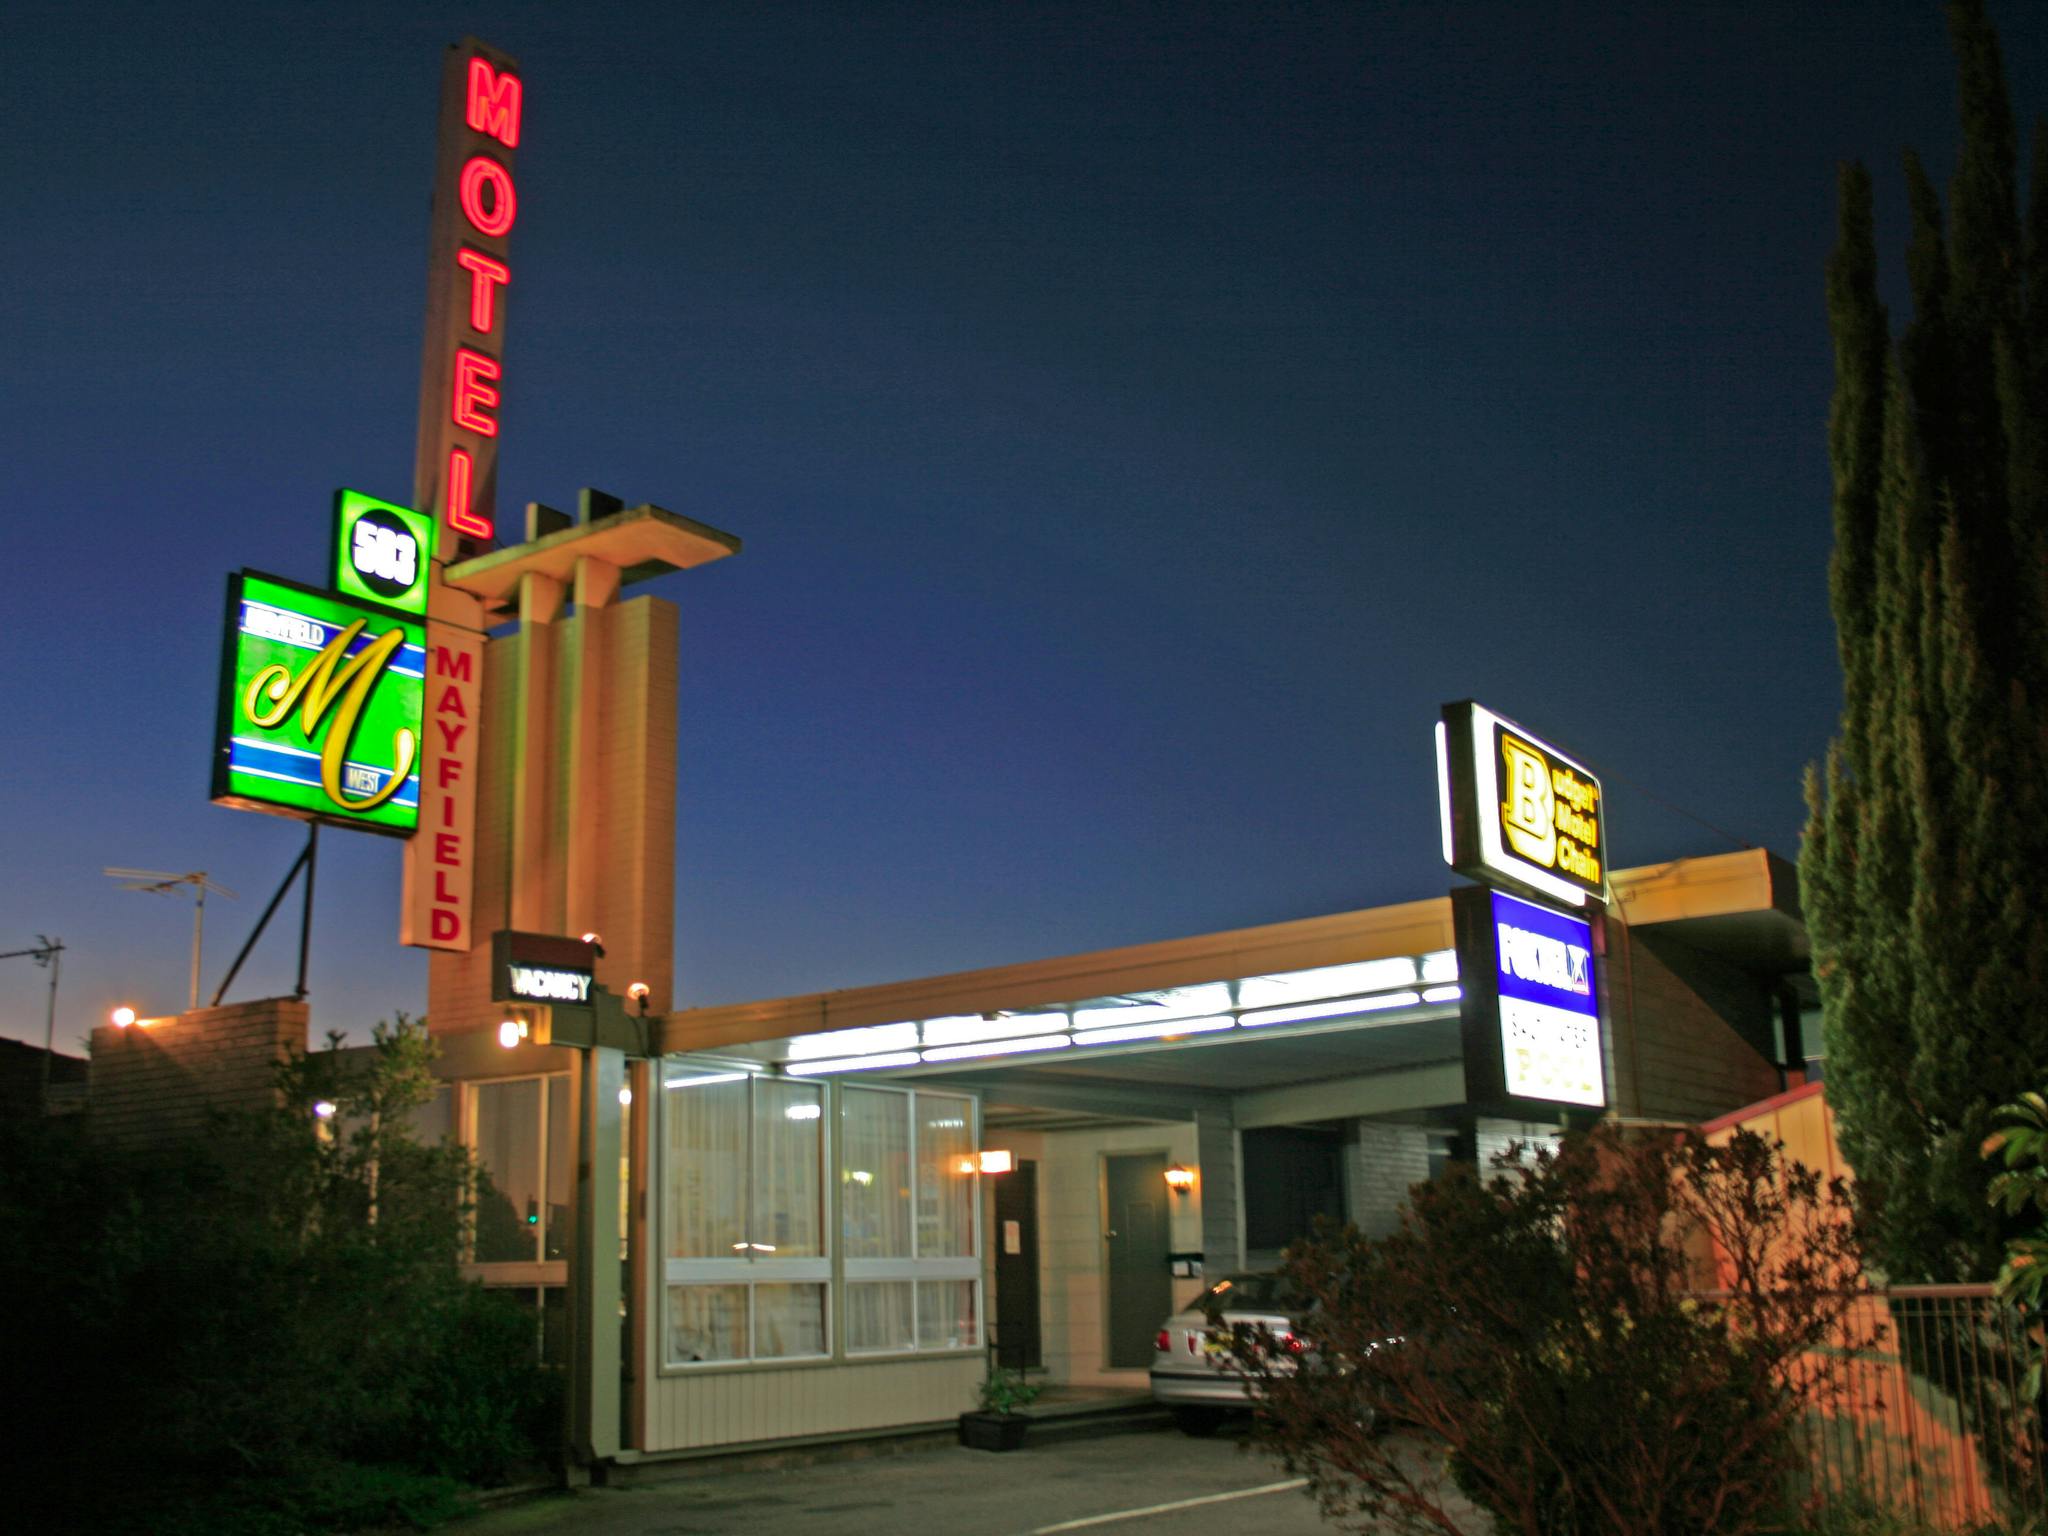 Mayfield Motel front entrance and classic neon signs at night